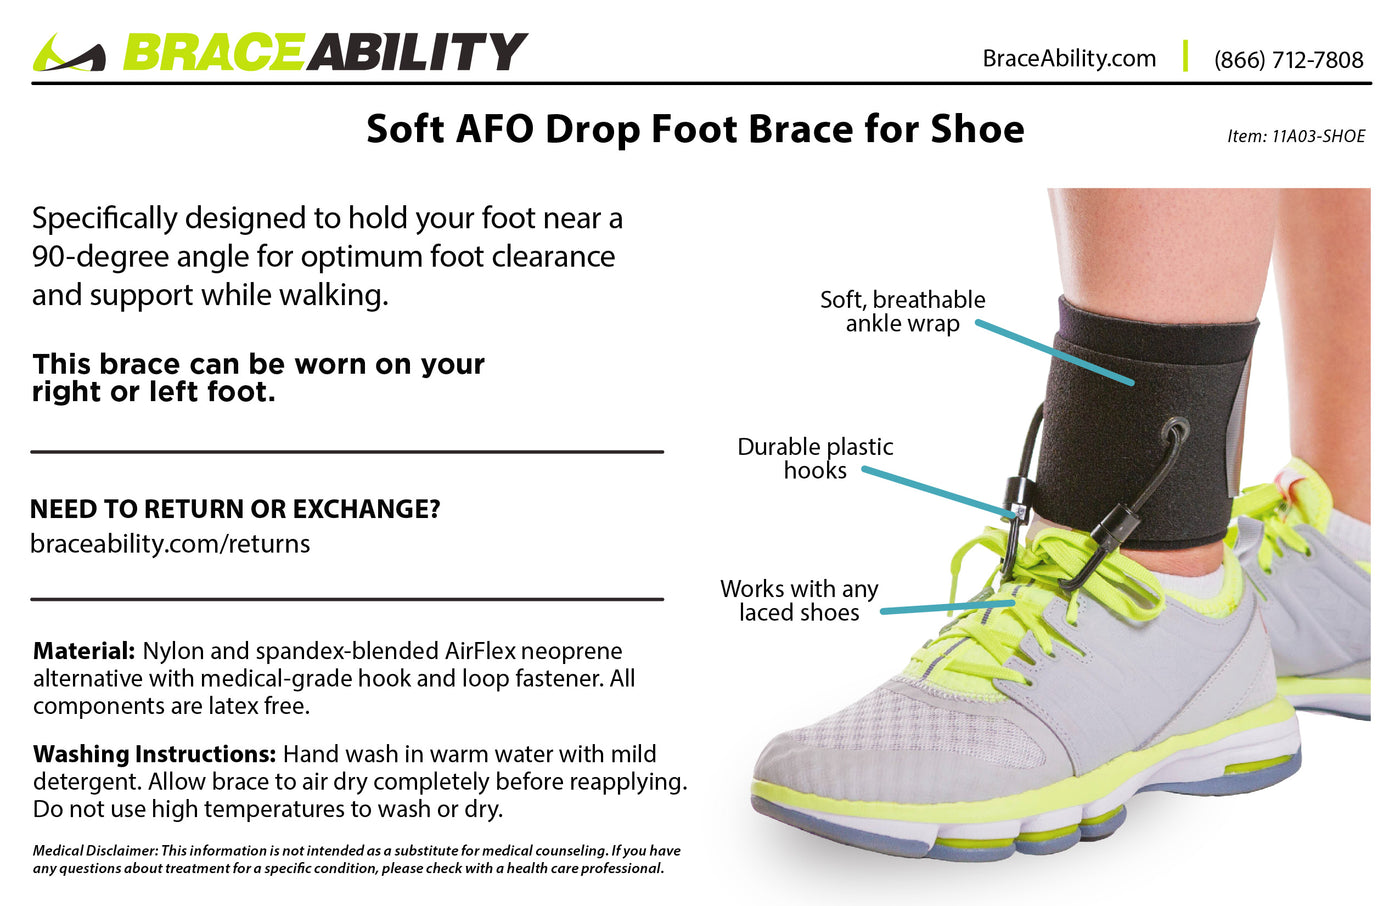 to clean the soft afo drop foot brace, hand wash in warm water with mild detergent and air dry